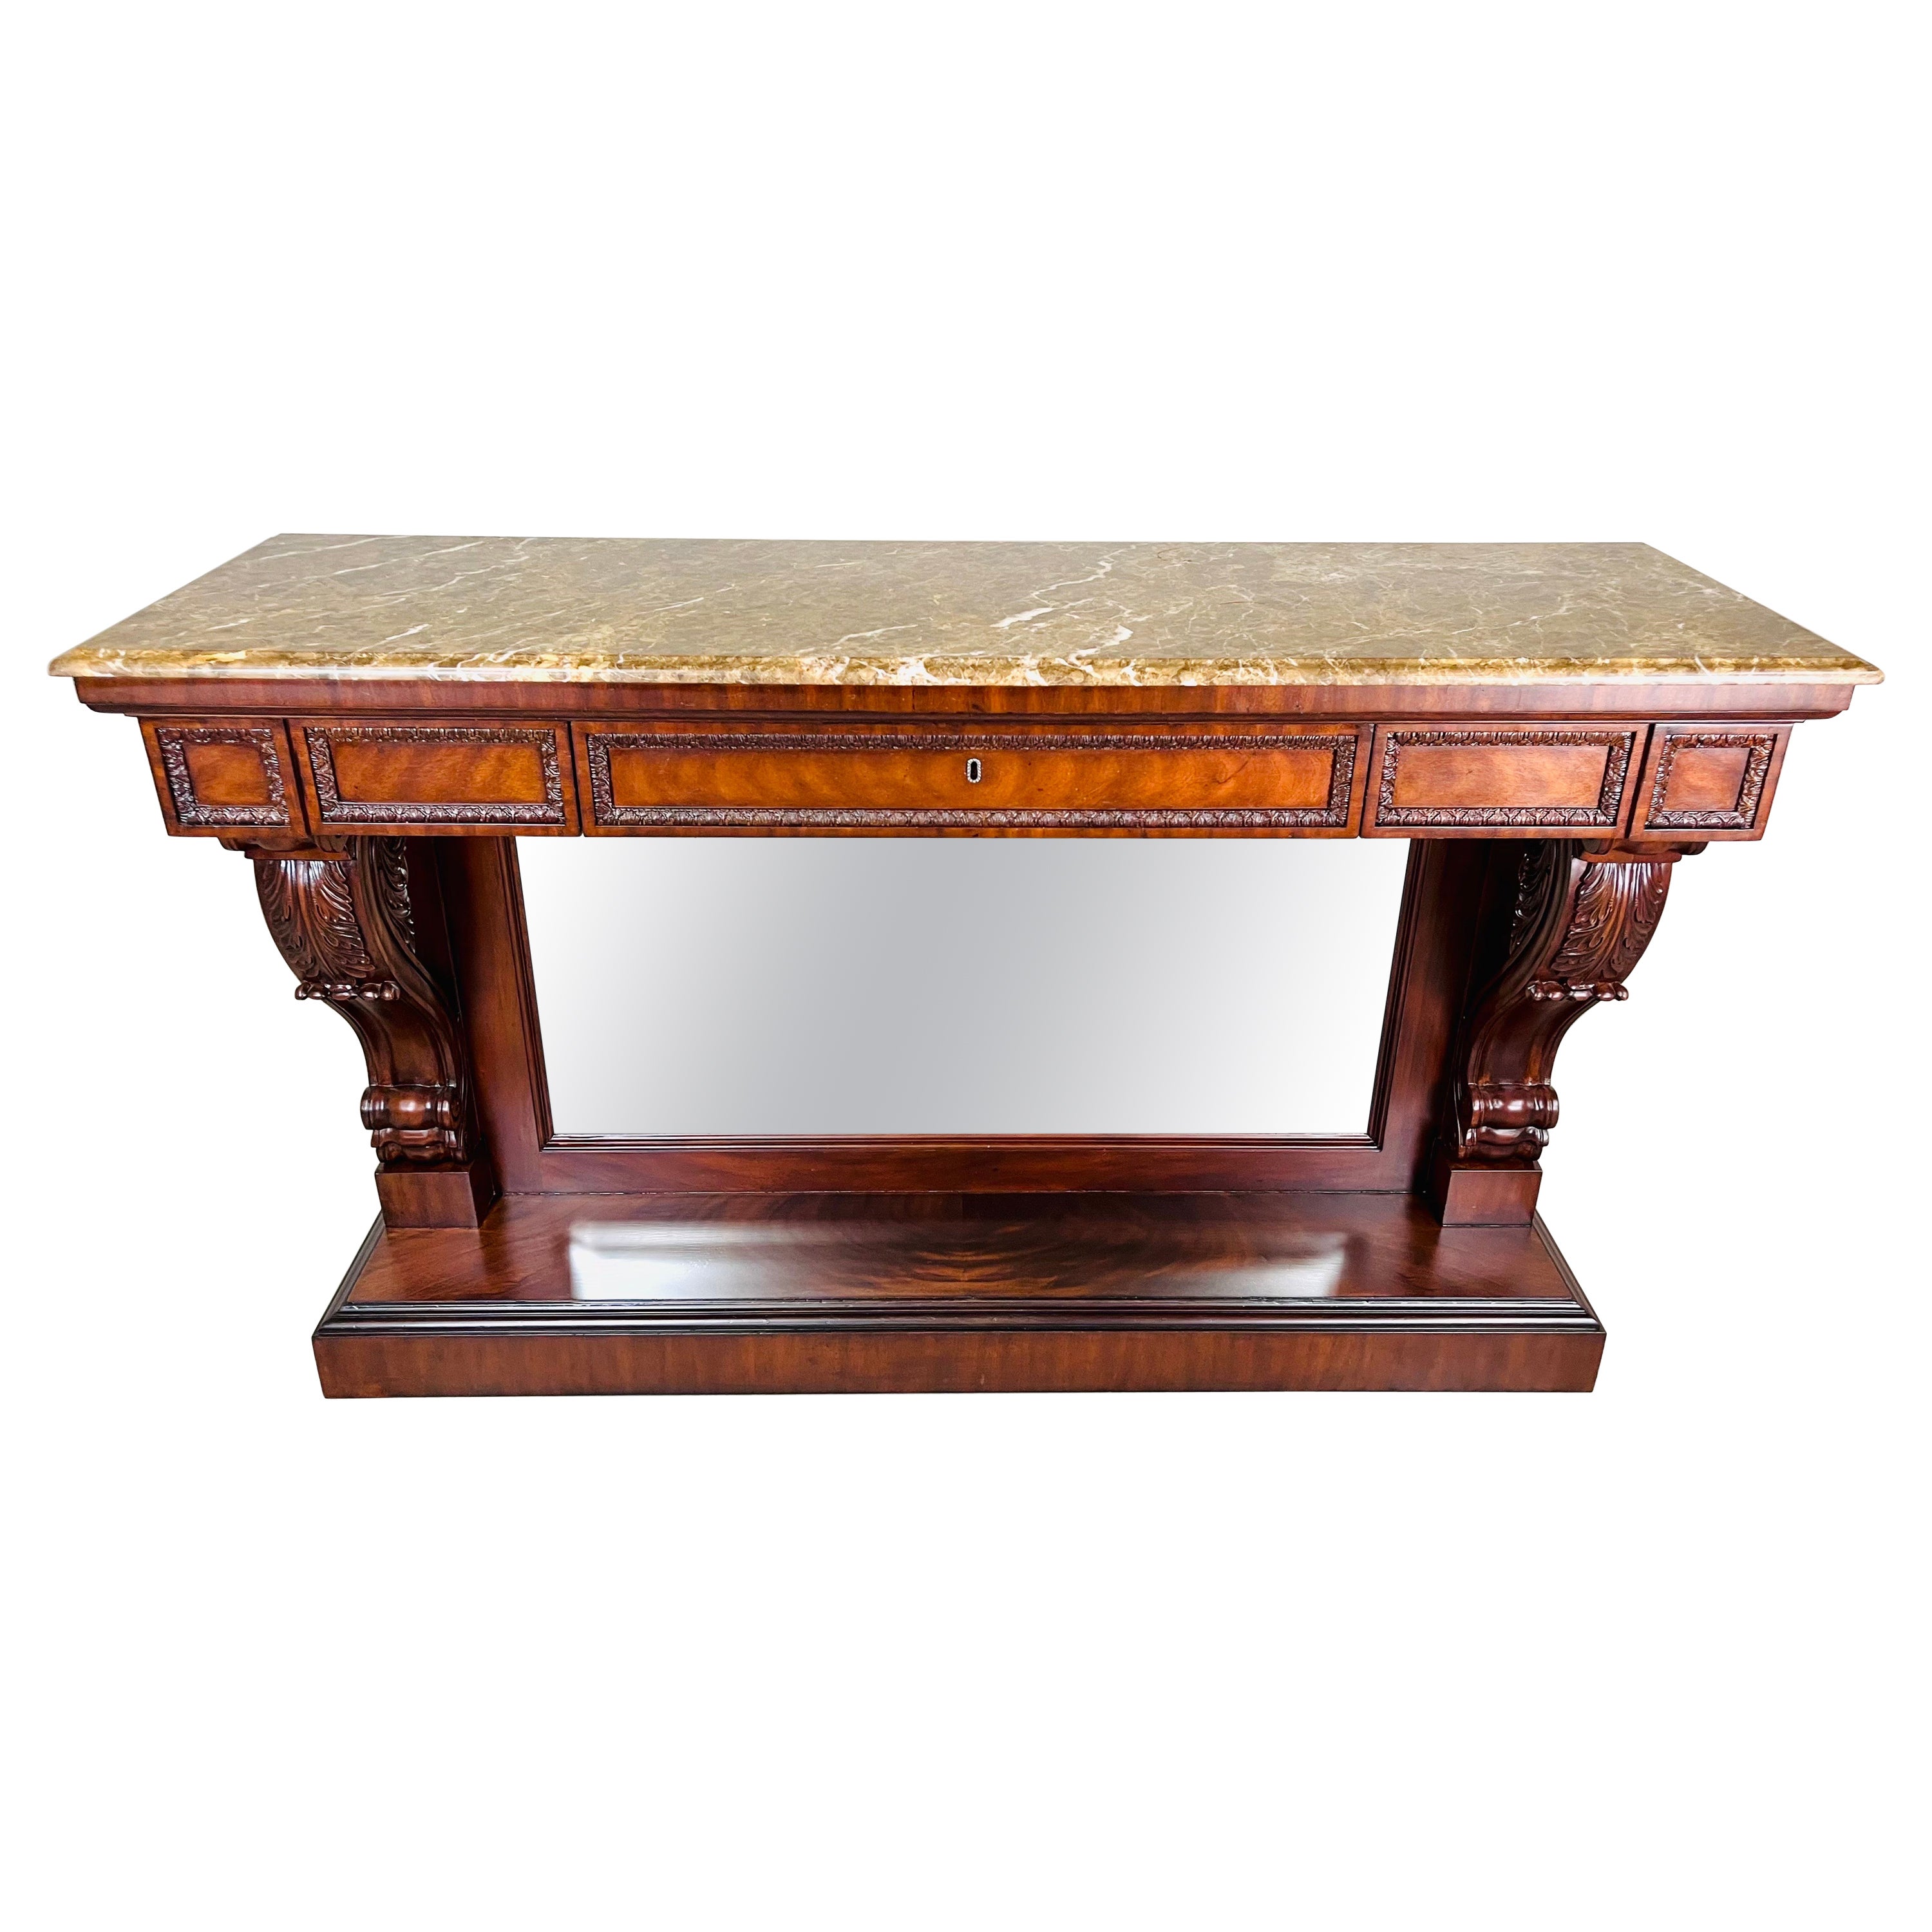 Ralph Lauren William IV Style Carved Mahogany Mirrored Marble Top Console Table